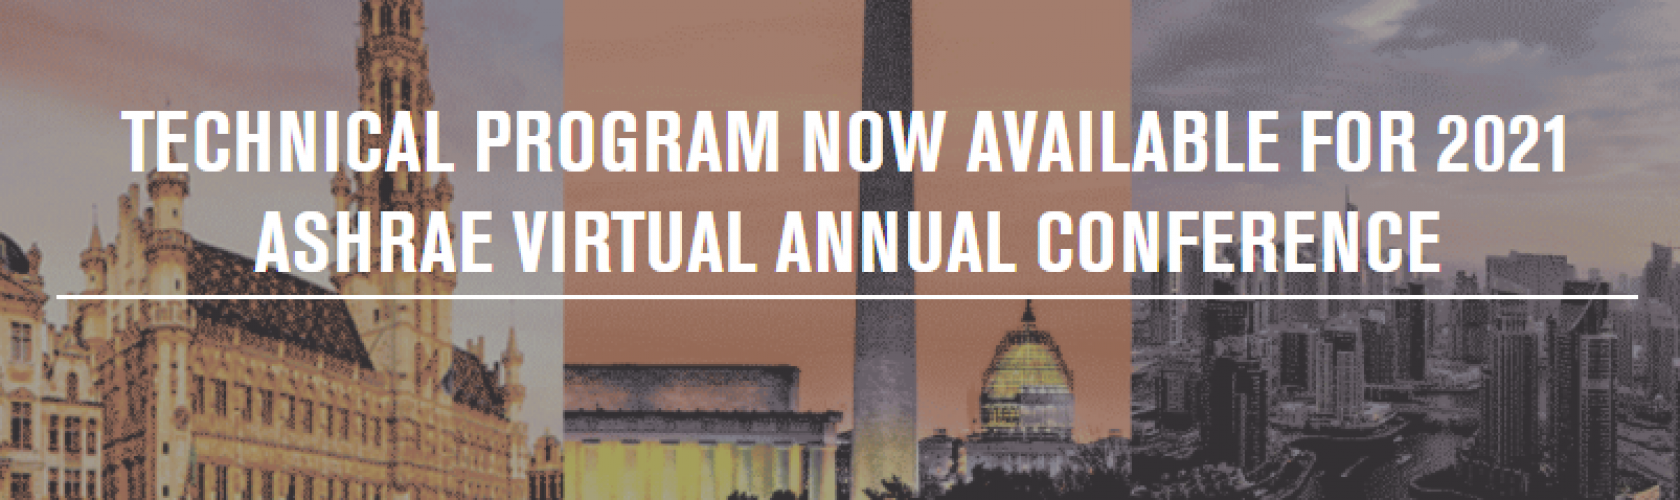 technical-program-now-available-for-2021-ashrae-virtual-annual-conference